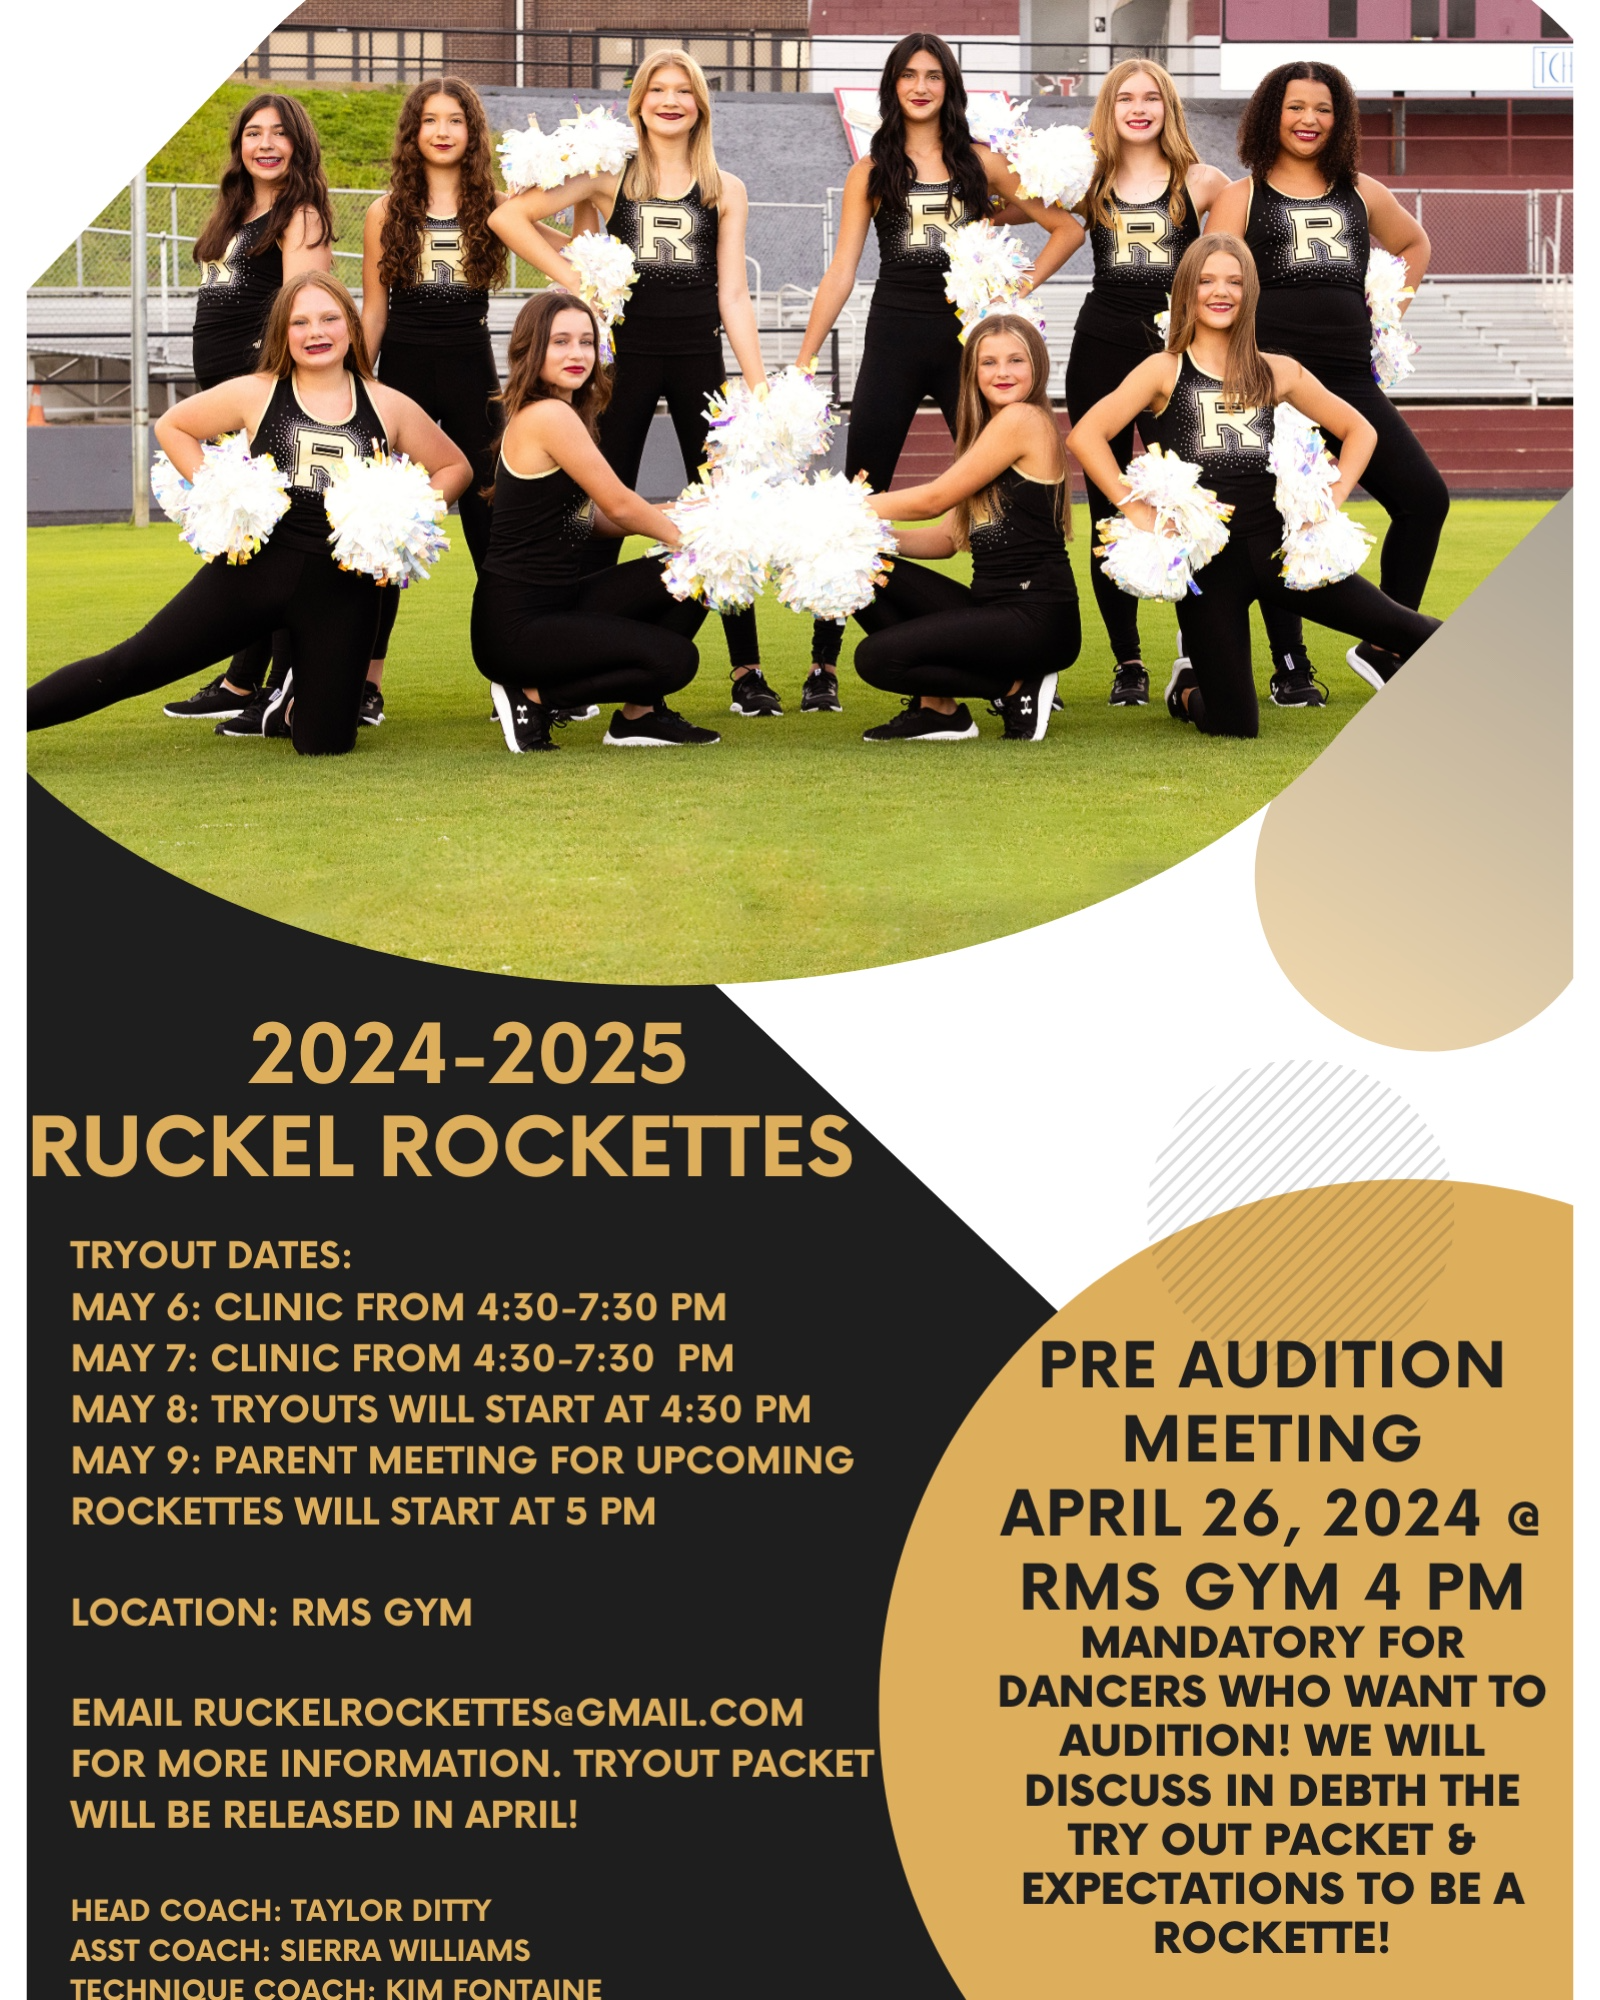 Details for RMS Dance Team Kids Clinic